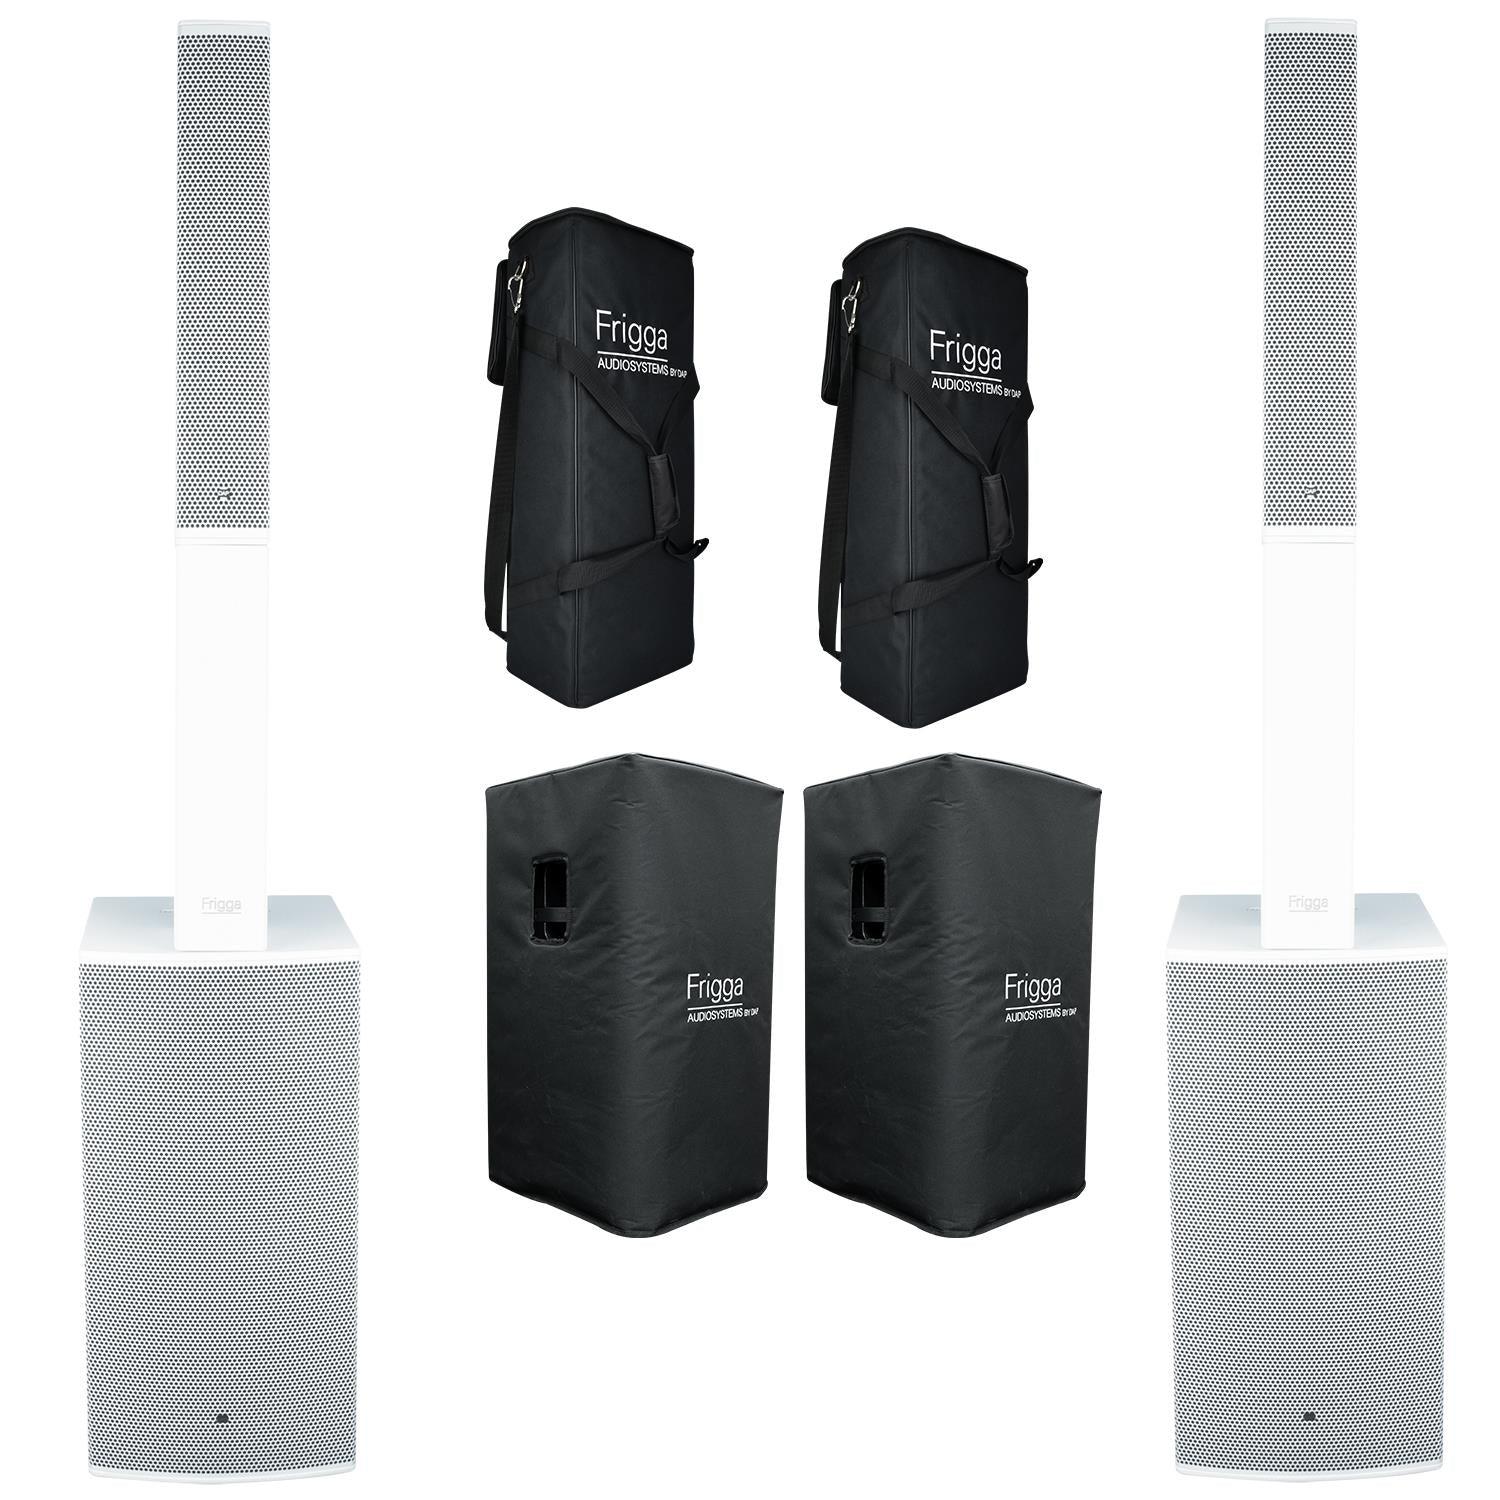 2 x DAP Frigga 12" White Active Column PA System With Carry Bags - DY Pro Audio